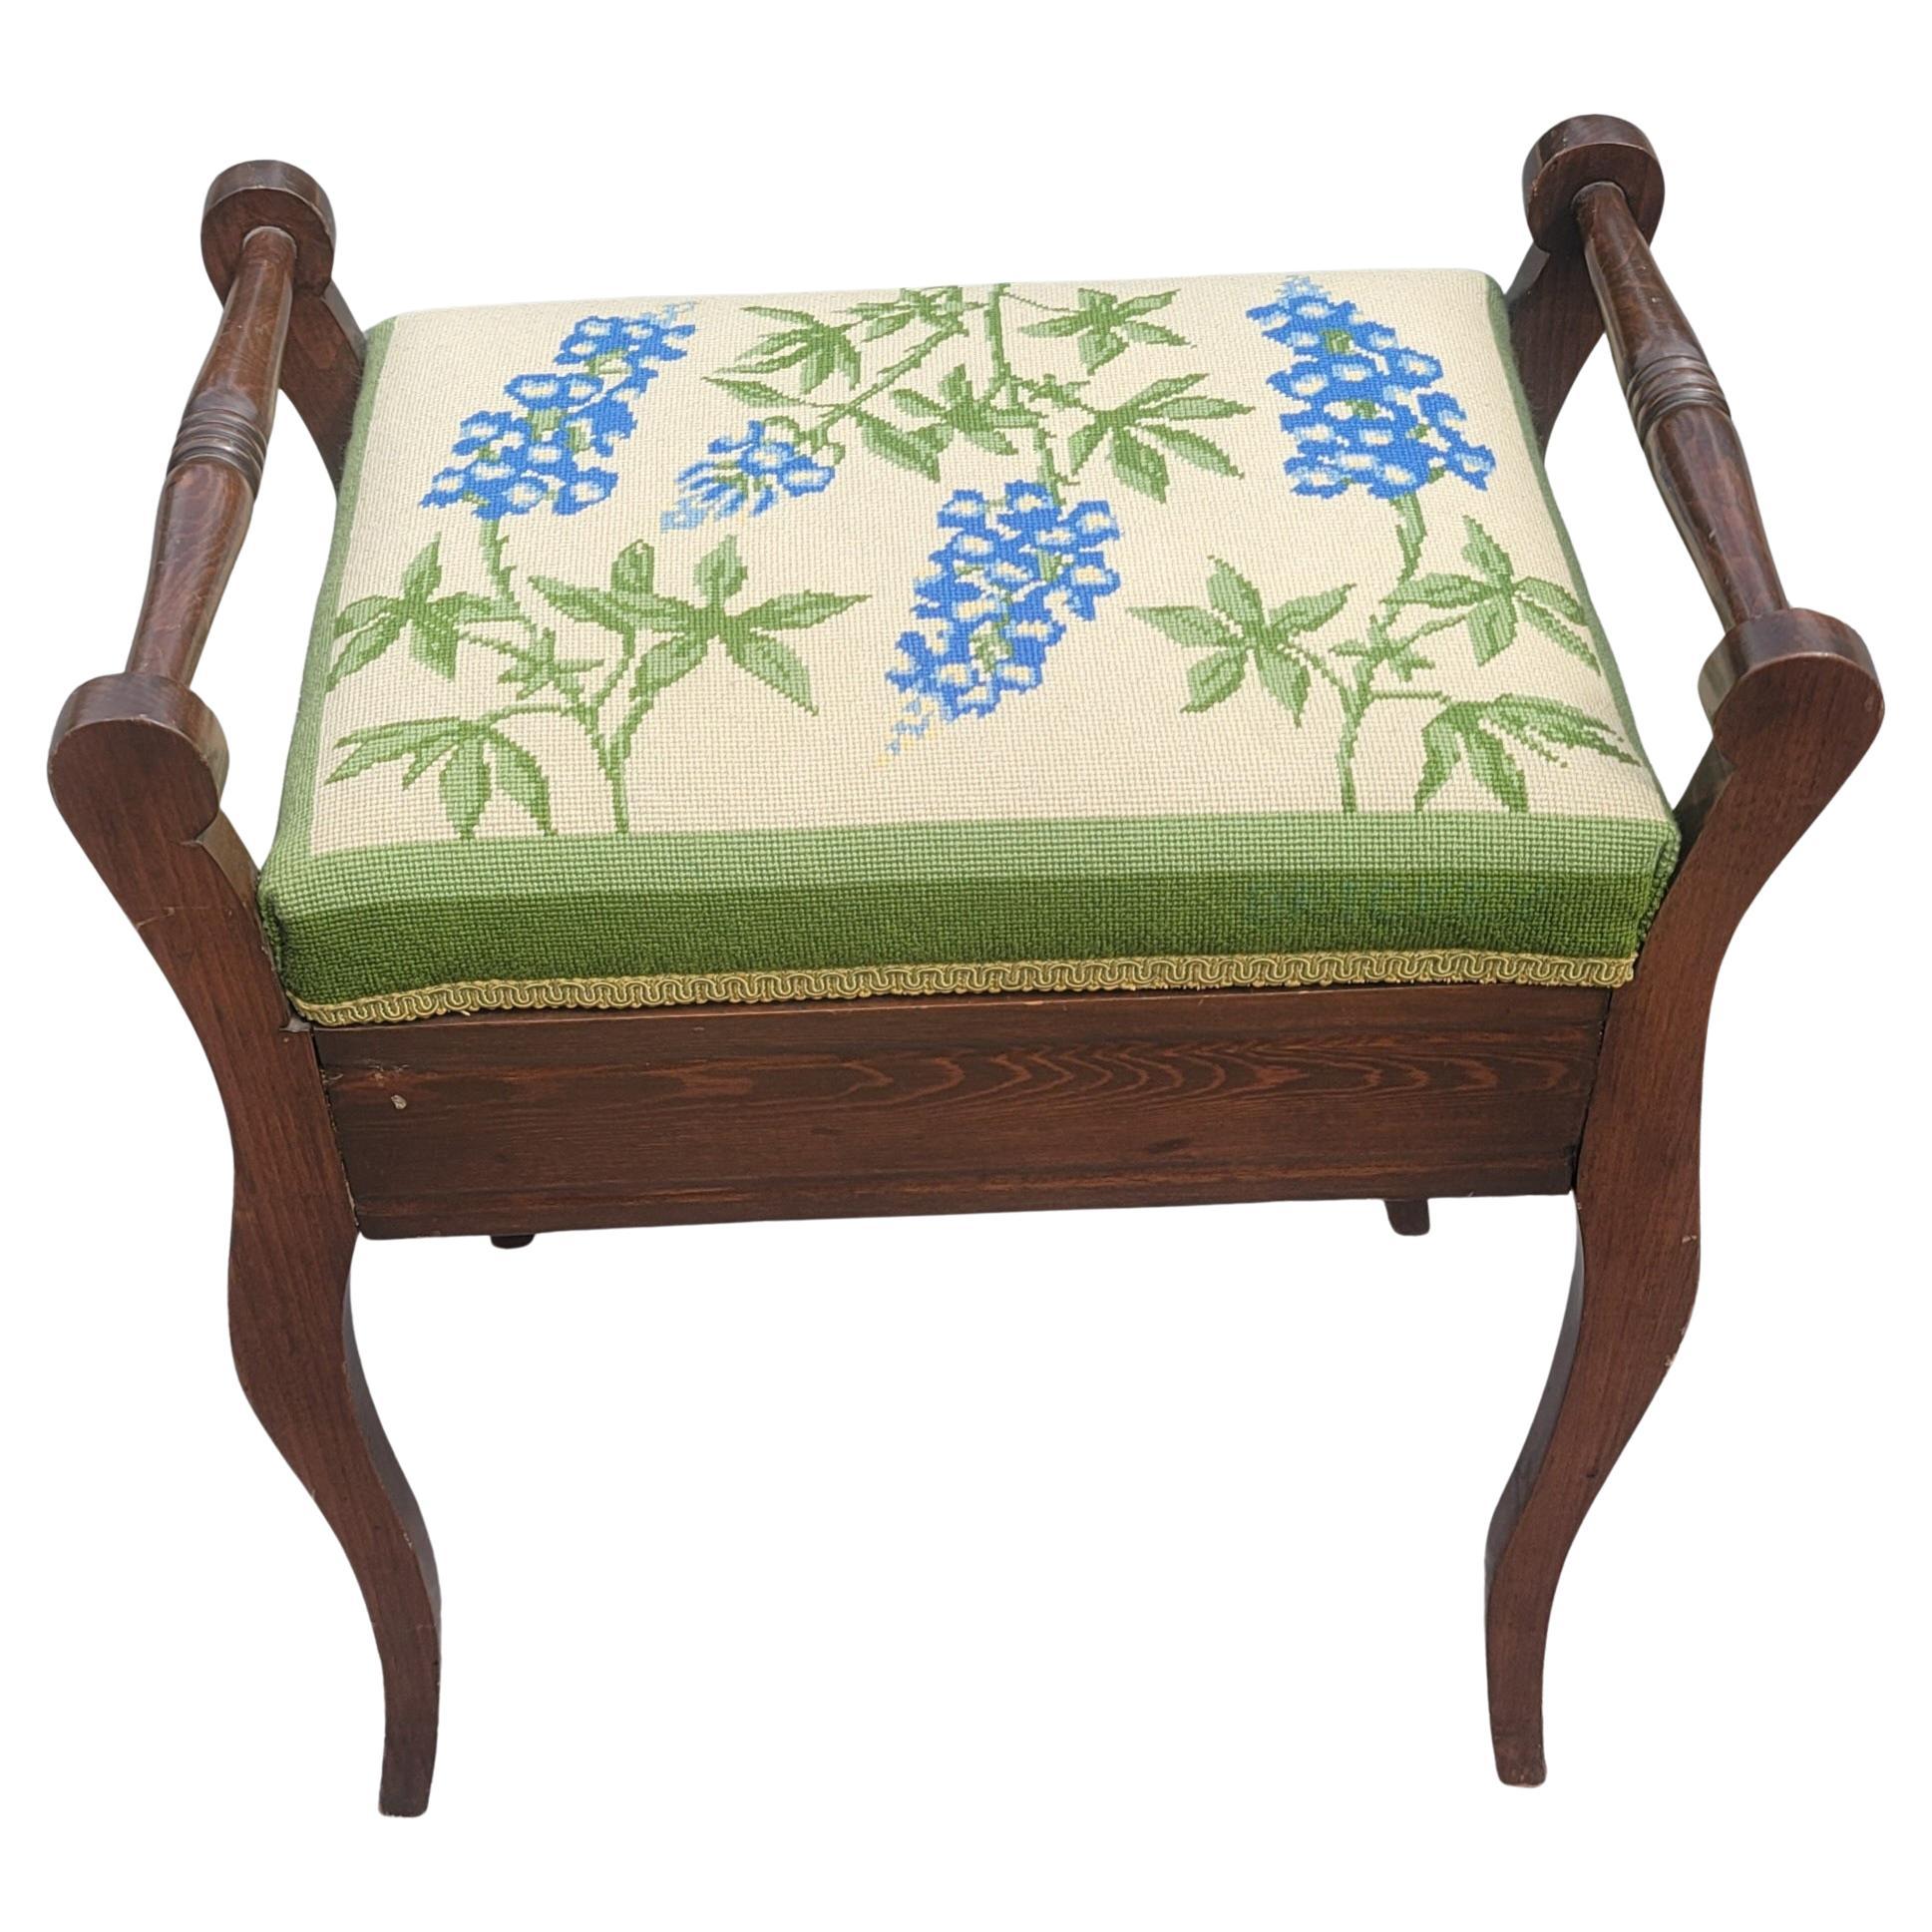 A beautiful, totally refinished and needlepoint reupholstered Stool bench for use by the bed side, as vanity bench or piano Stool. This bench Stool is sturdy, beautiful and clean. A true gem. Measures 20.25